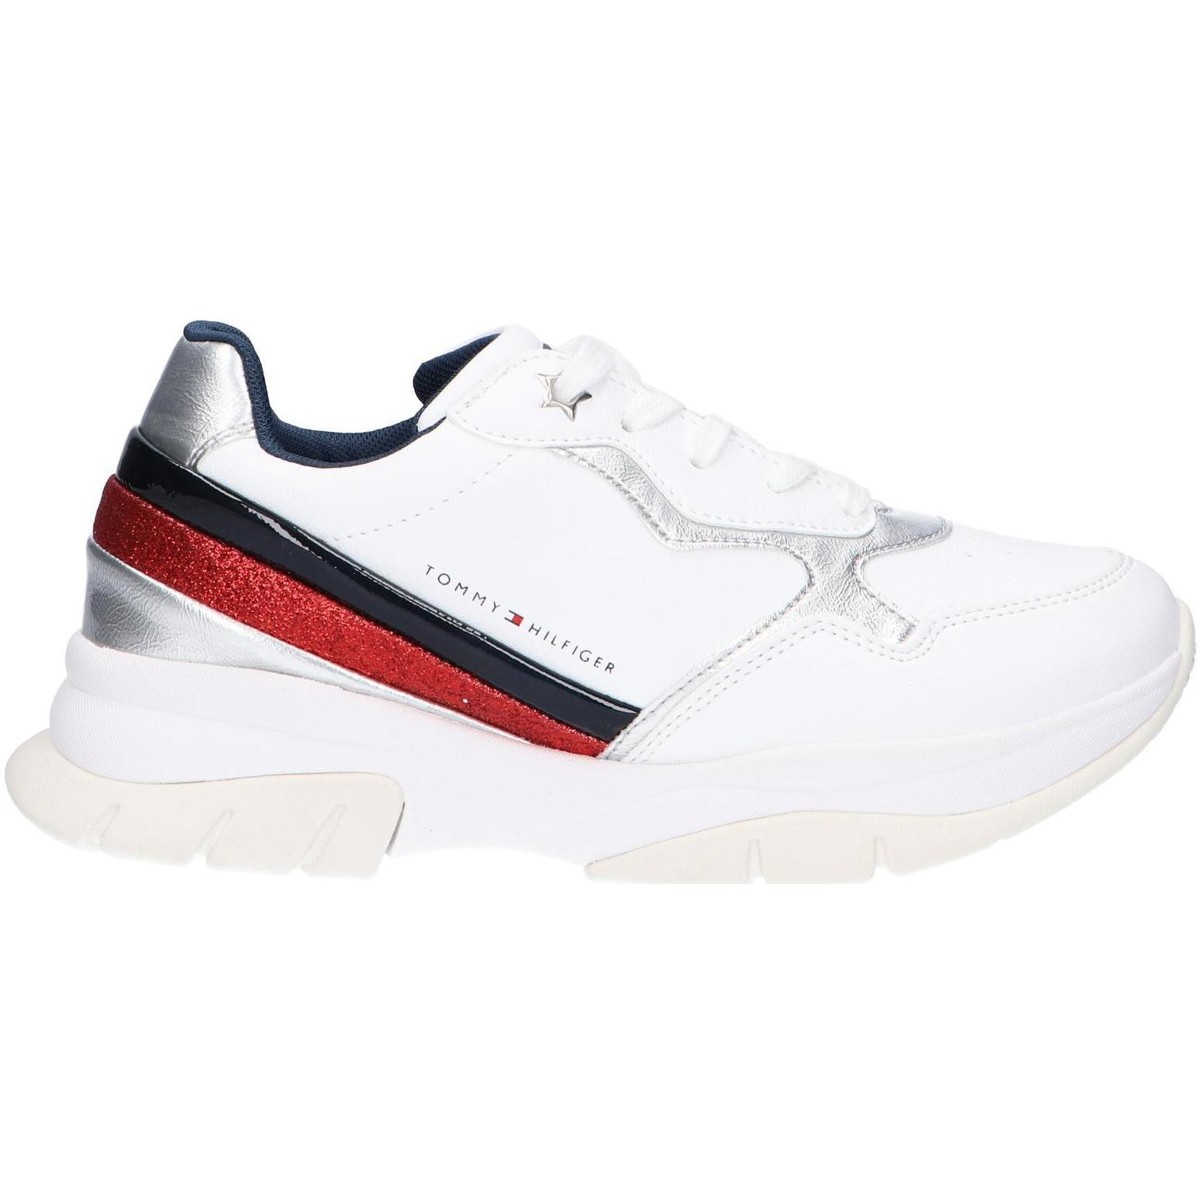 Chaussures Femme Multisport Tommy Hilfiger T3A4-31175-0196X256 T3A4-31175-0196X256 